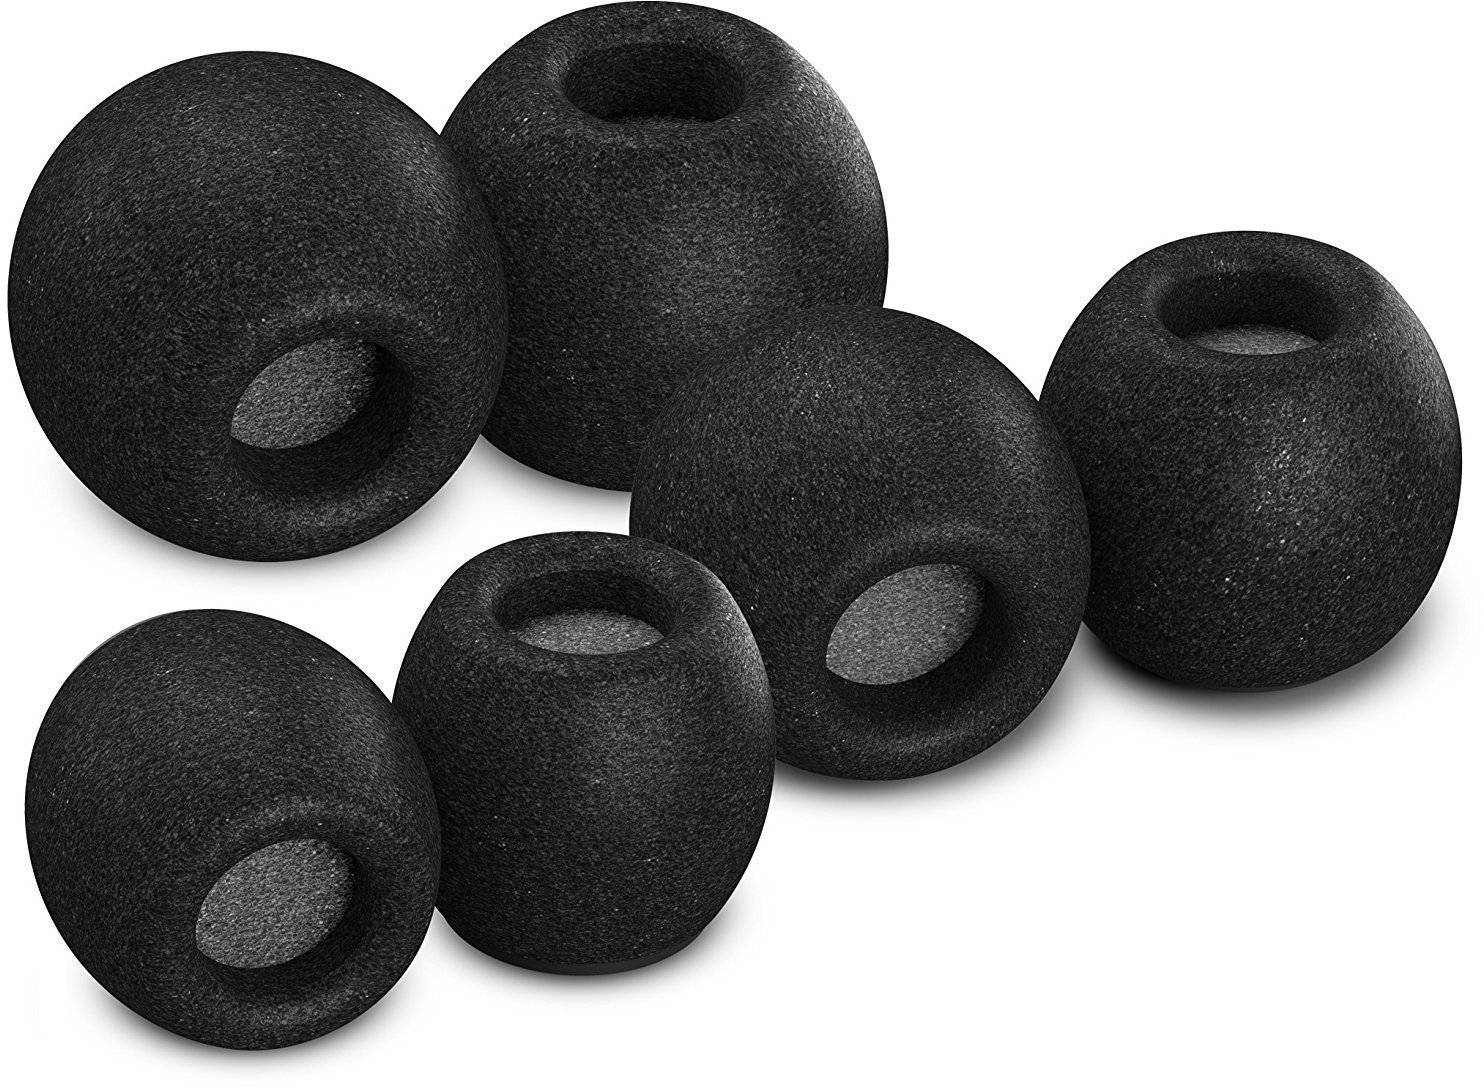 Ear Tips for In-Ears Comply Ear Pads for headphones Black